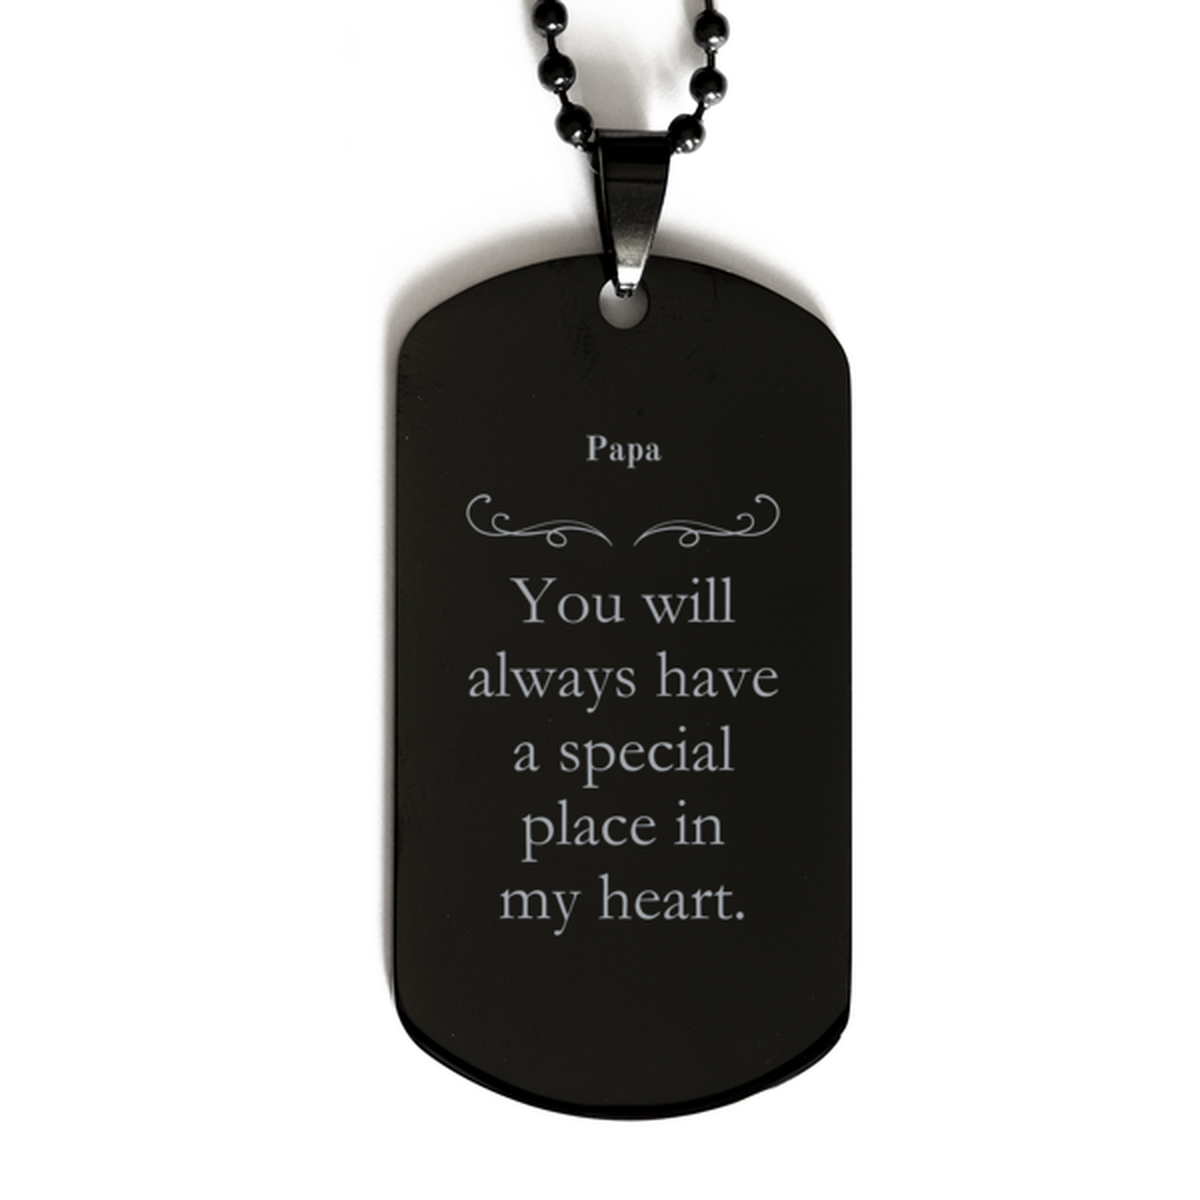 Engraved Black Dog Tag for Papa - Always in My Heart - Fathers Day Gift for Papa - Unique Papa Gift for Birthday, Christmas, and Veterans Day